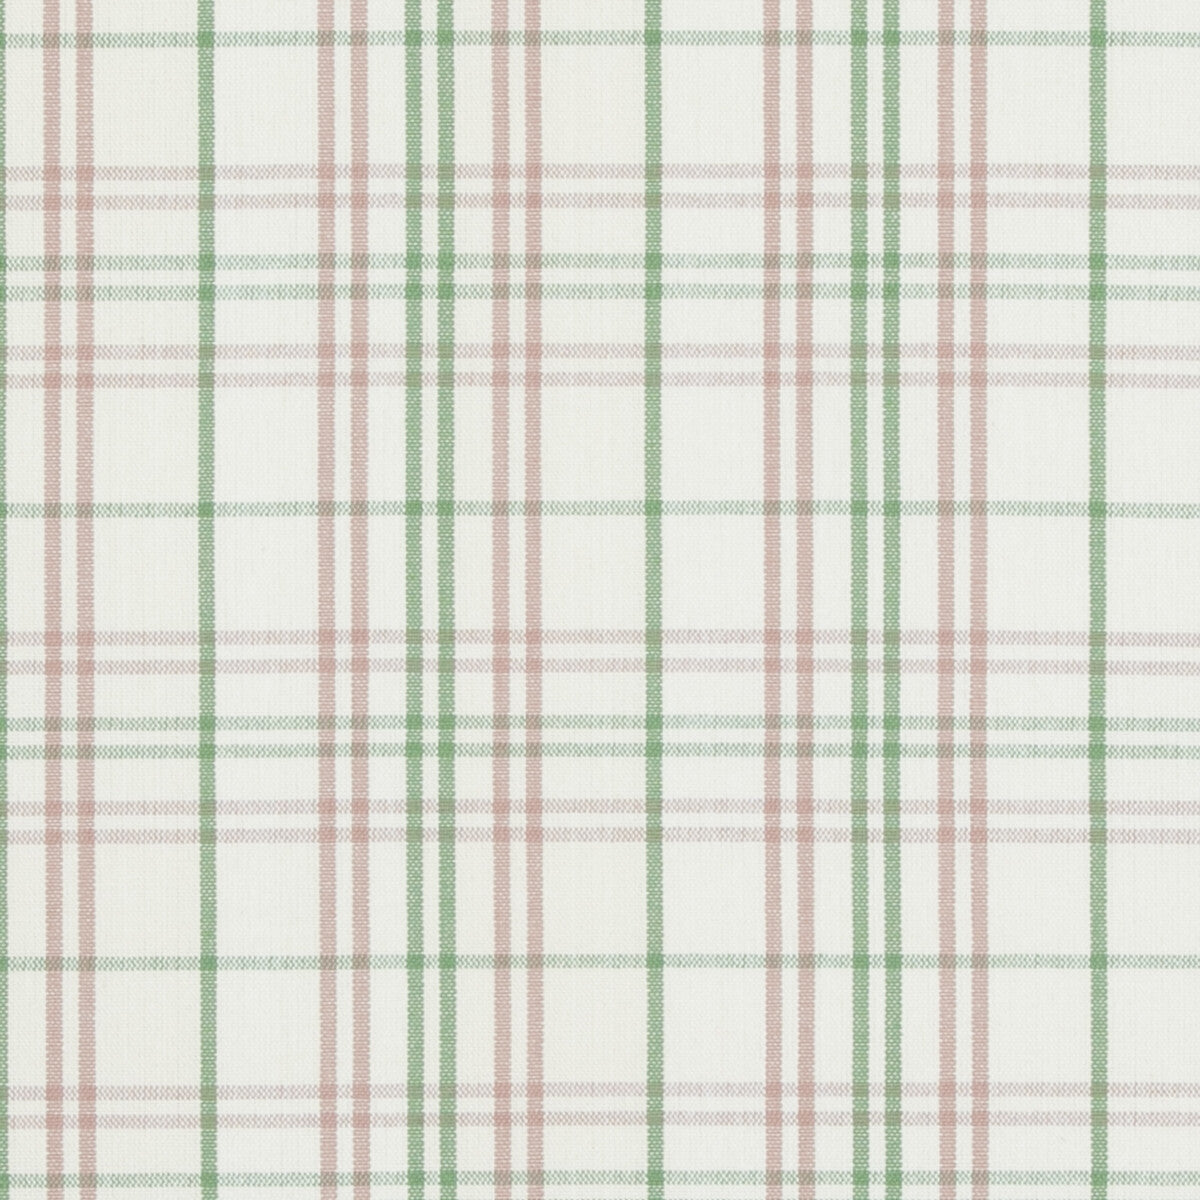 Purbeck Check fabric in pink/green color - pattern PF50508.3.0 - by Baker Lifestyle in the Bridport collection